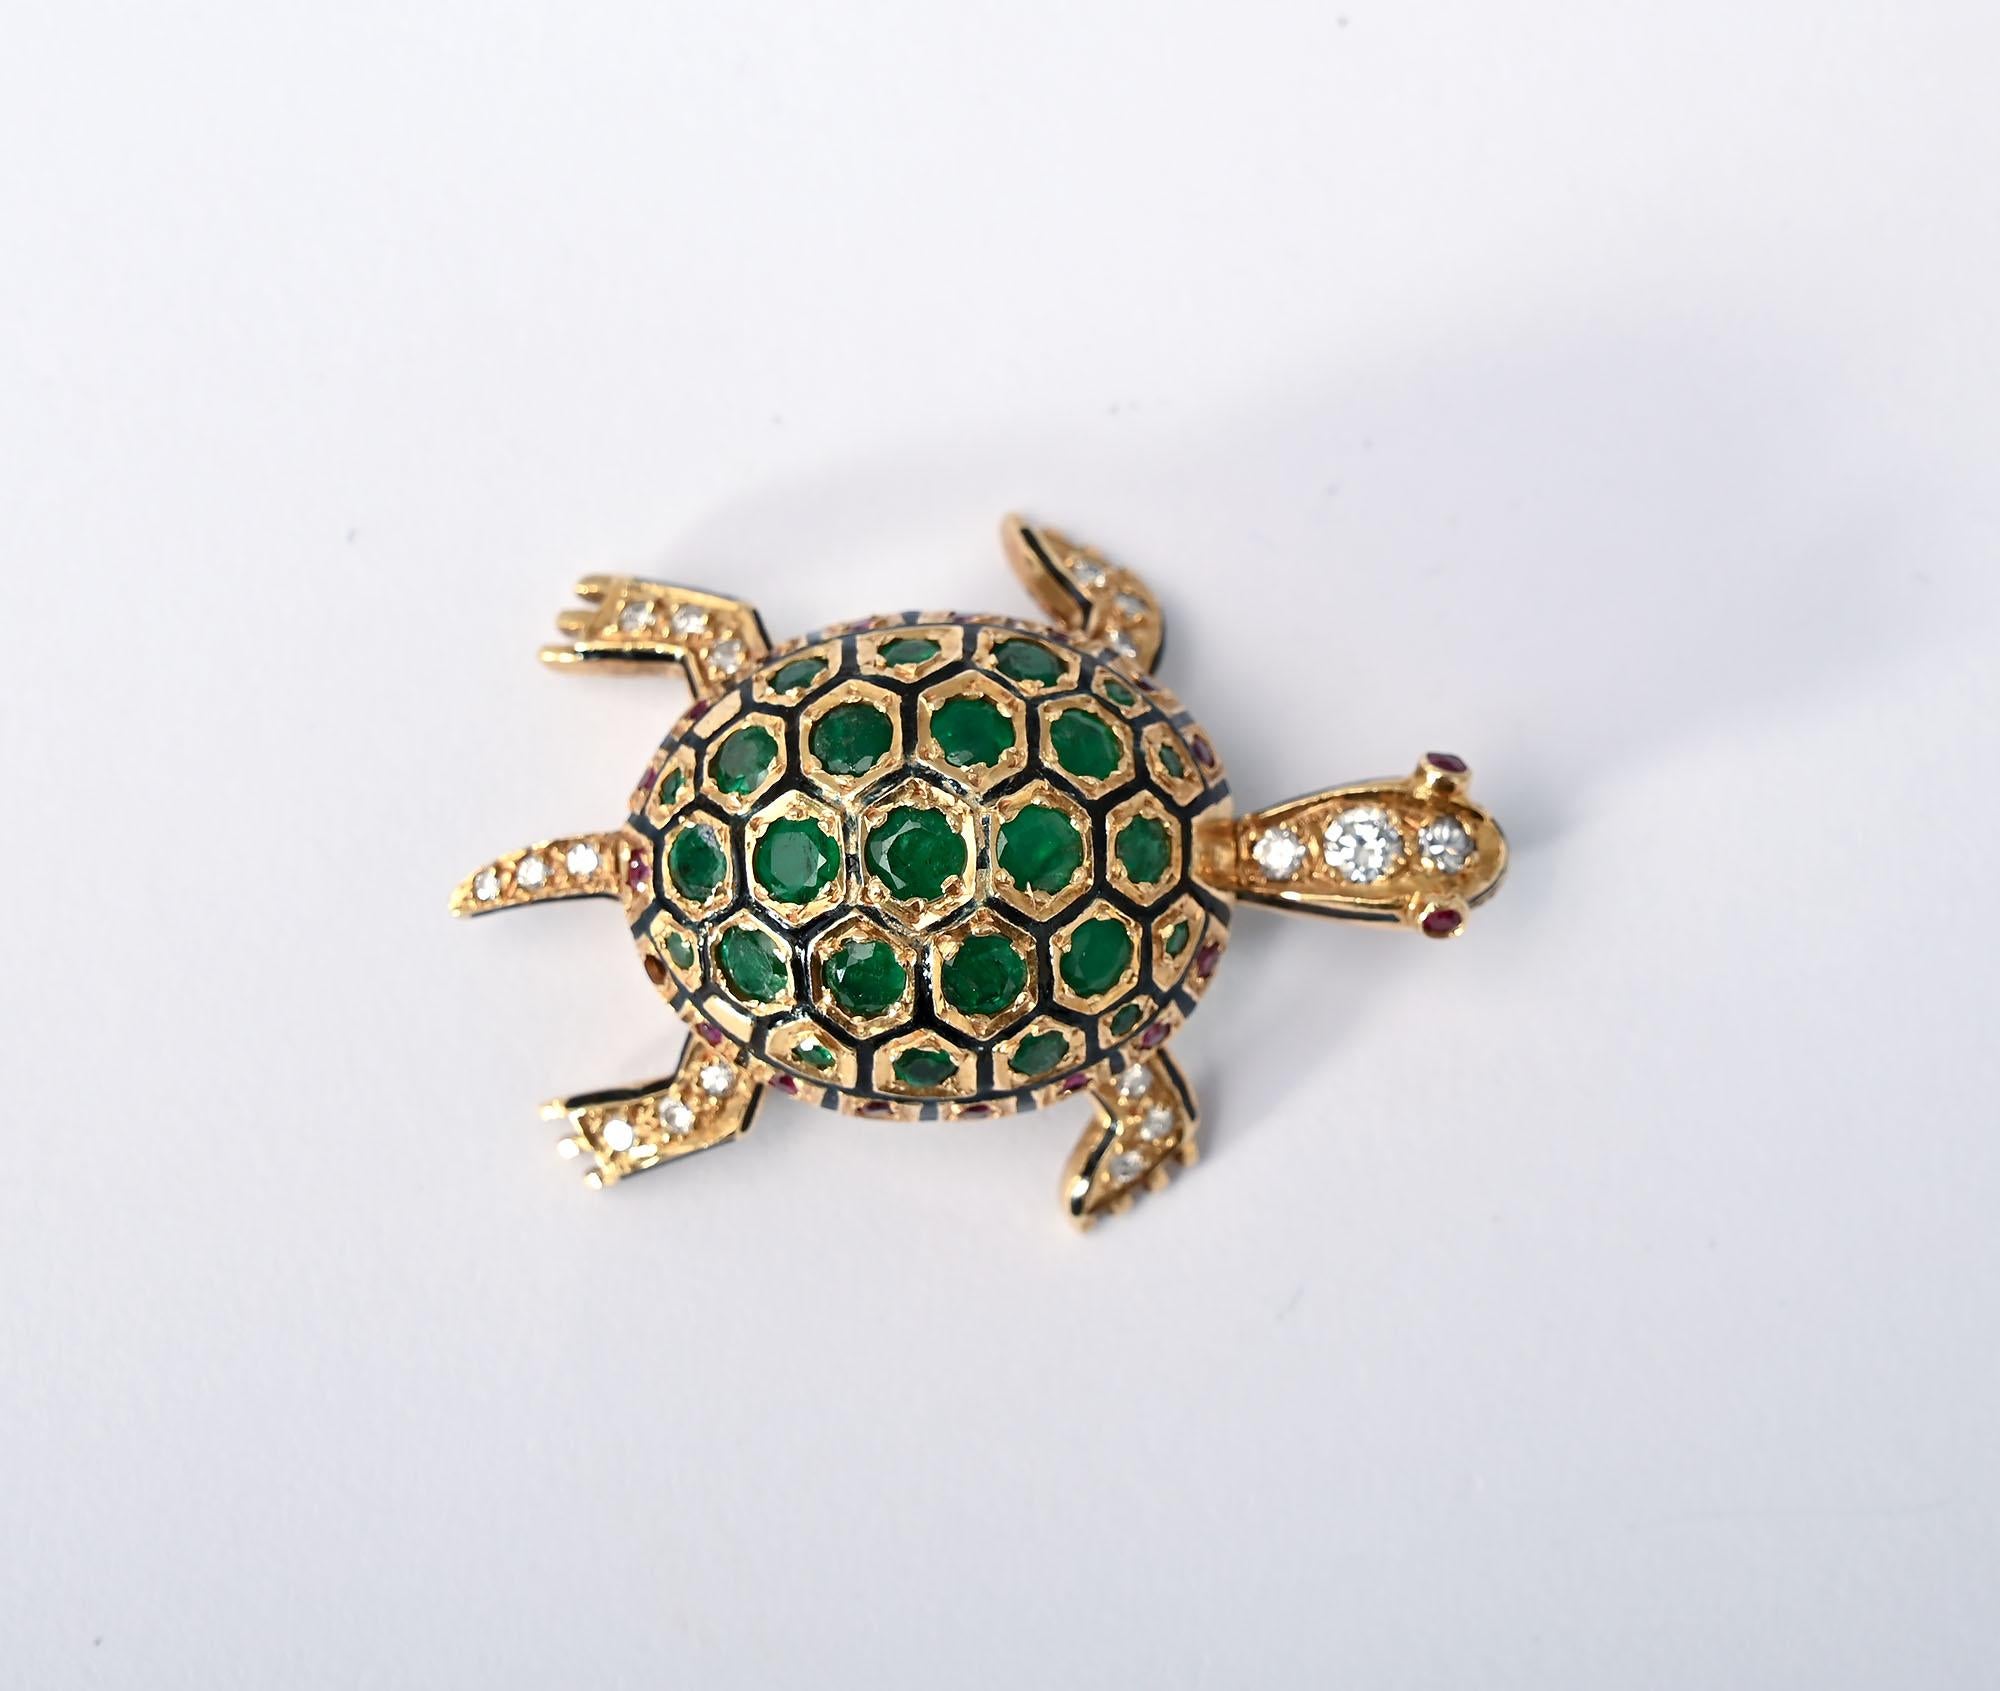 Charming turtle brooch with fine detail by Hammerman Brothers. The shell of the turtle is covered with emeralds. The head; legs and tail are covered with diamonds. The outer rim of the shell and the eyes are done with rubies.
The brooch measures 1